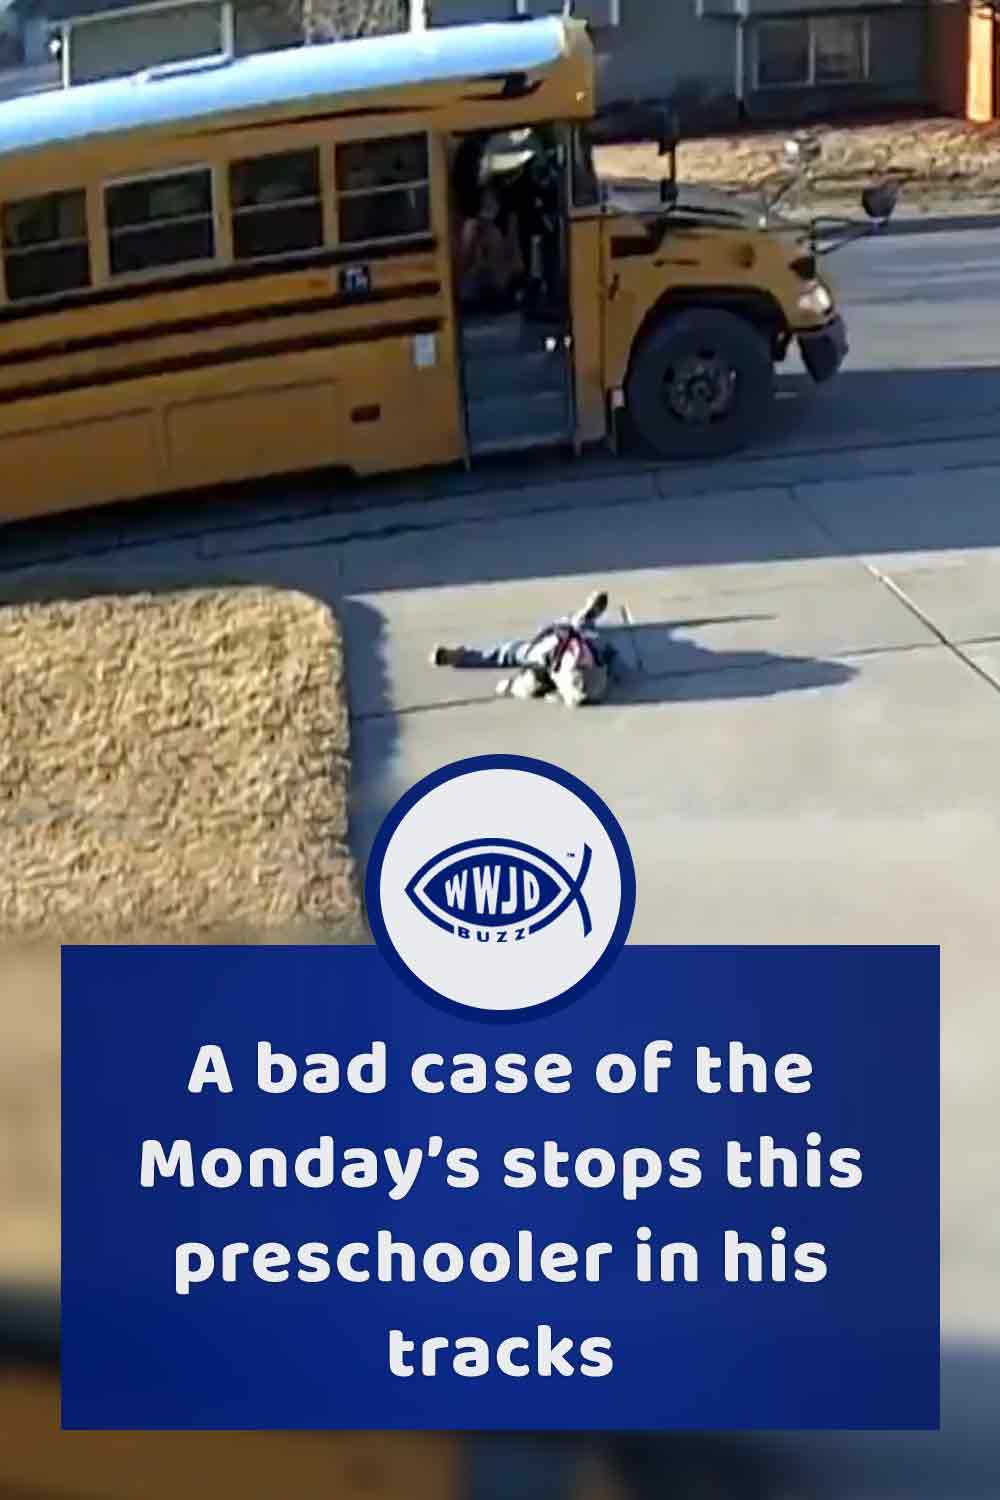 A bad case of the Monday’s stops this preschooler in his tracks